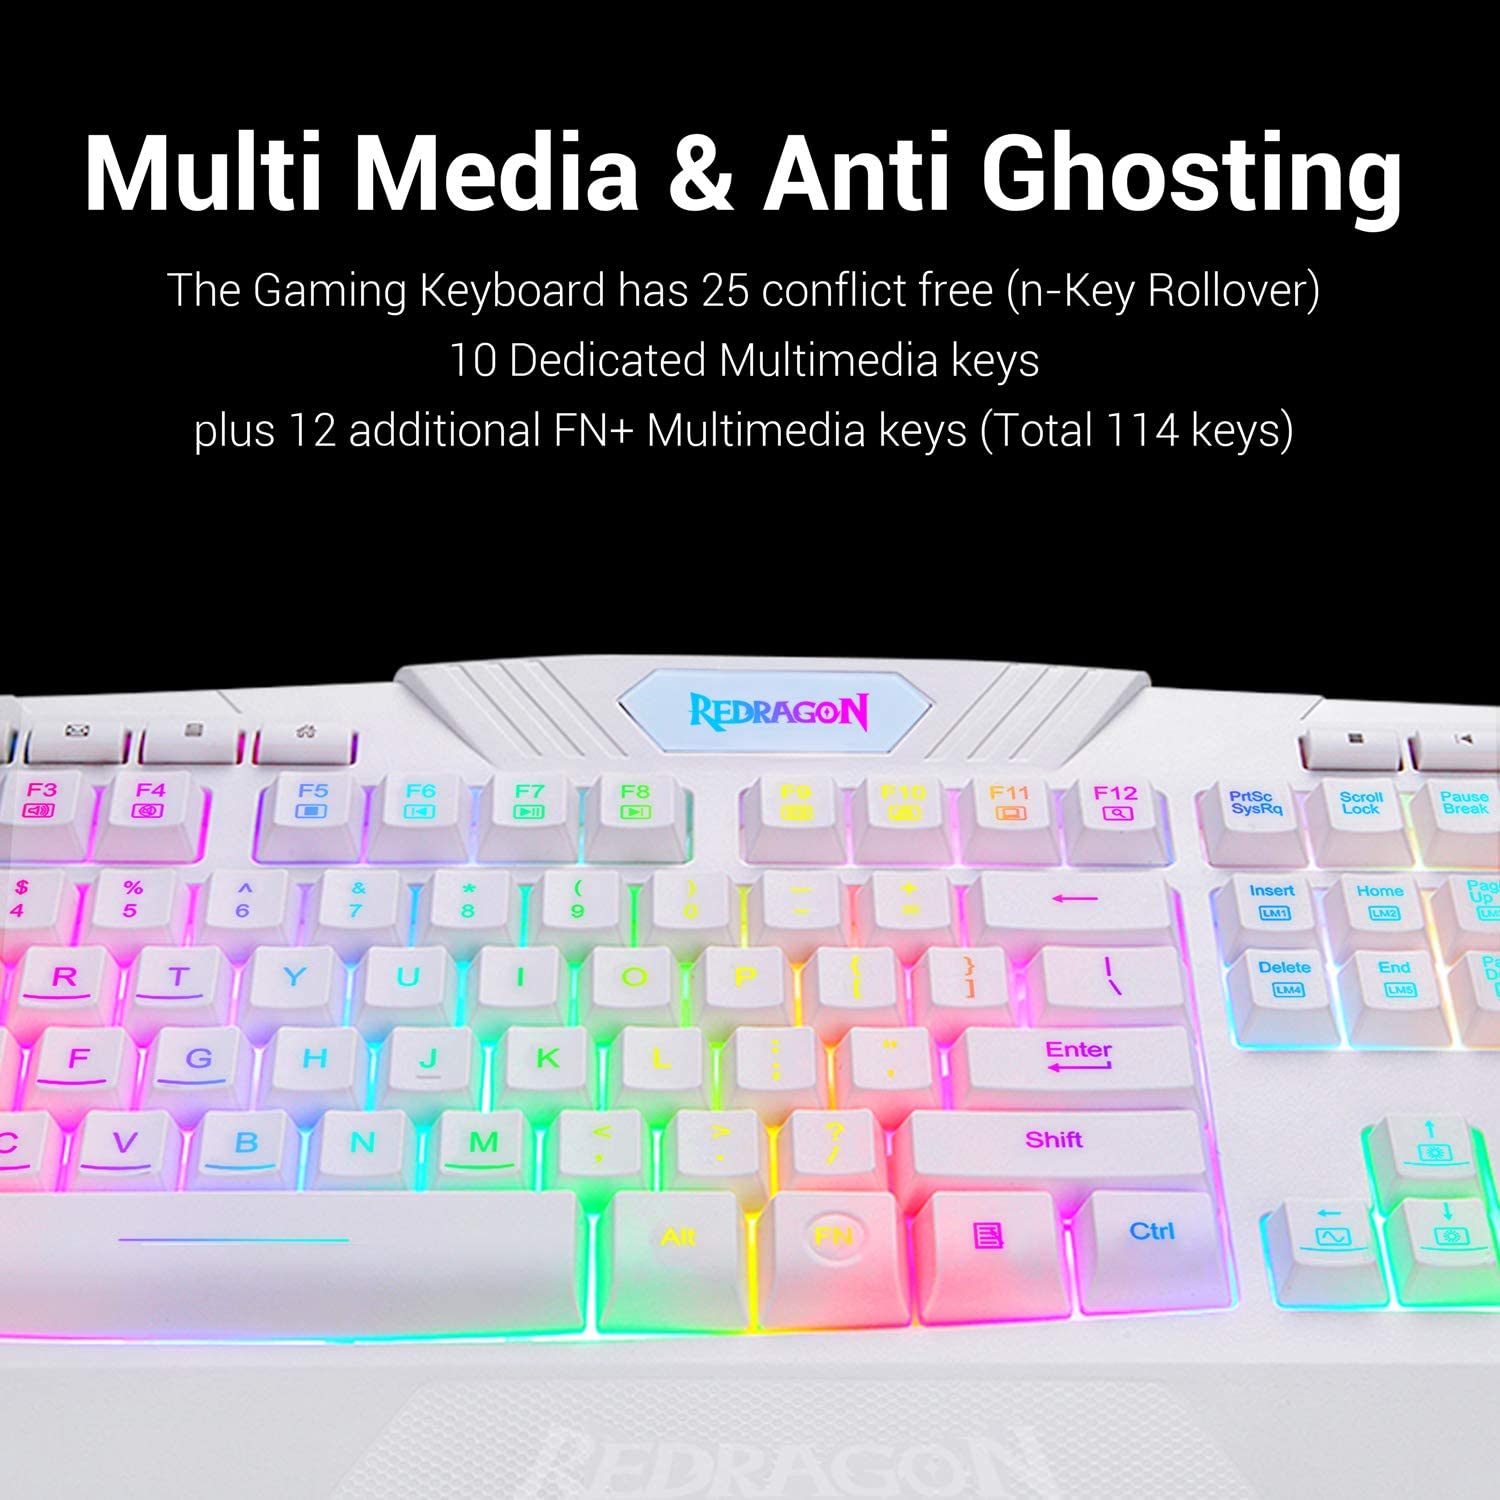 Wired Gaming Keyboard/Mouse Combo RGB Backlit Multimedia Keys Wrist Rest and Red Backlit Gaming Mouse 3200 DPI - KeysCaps